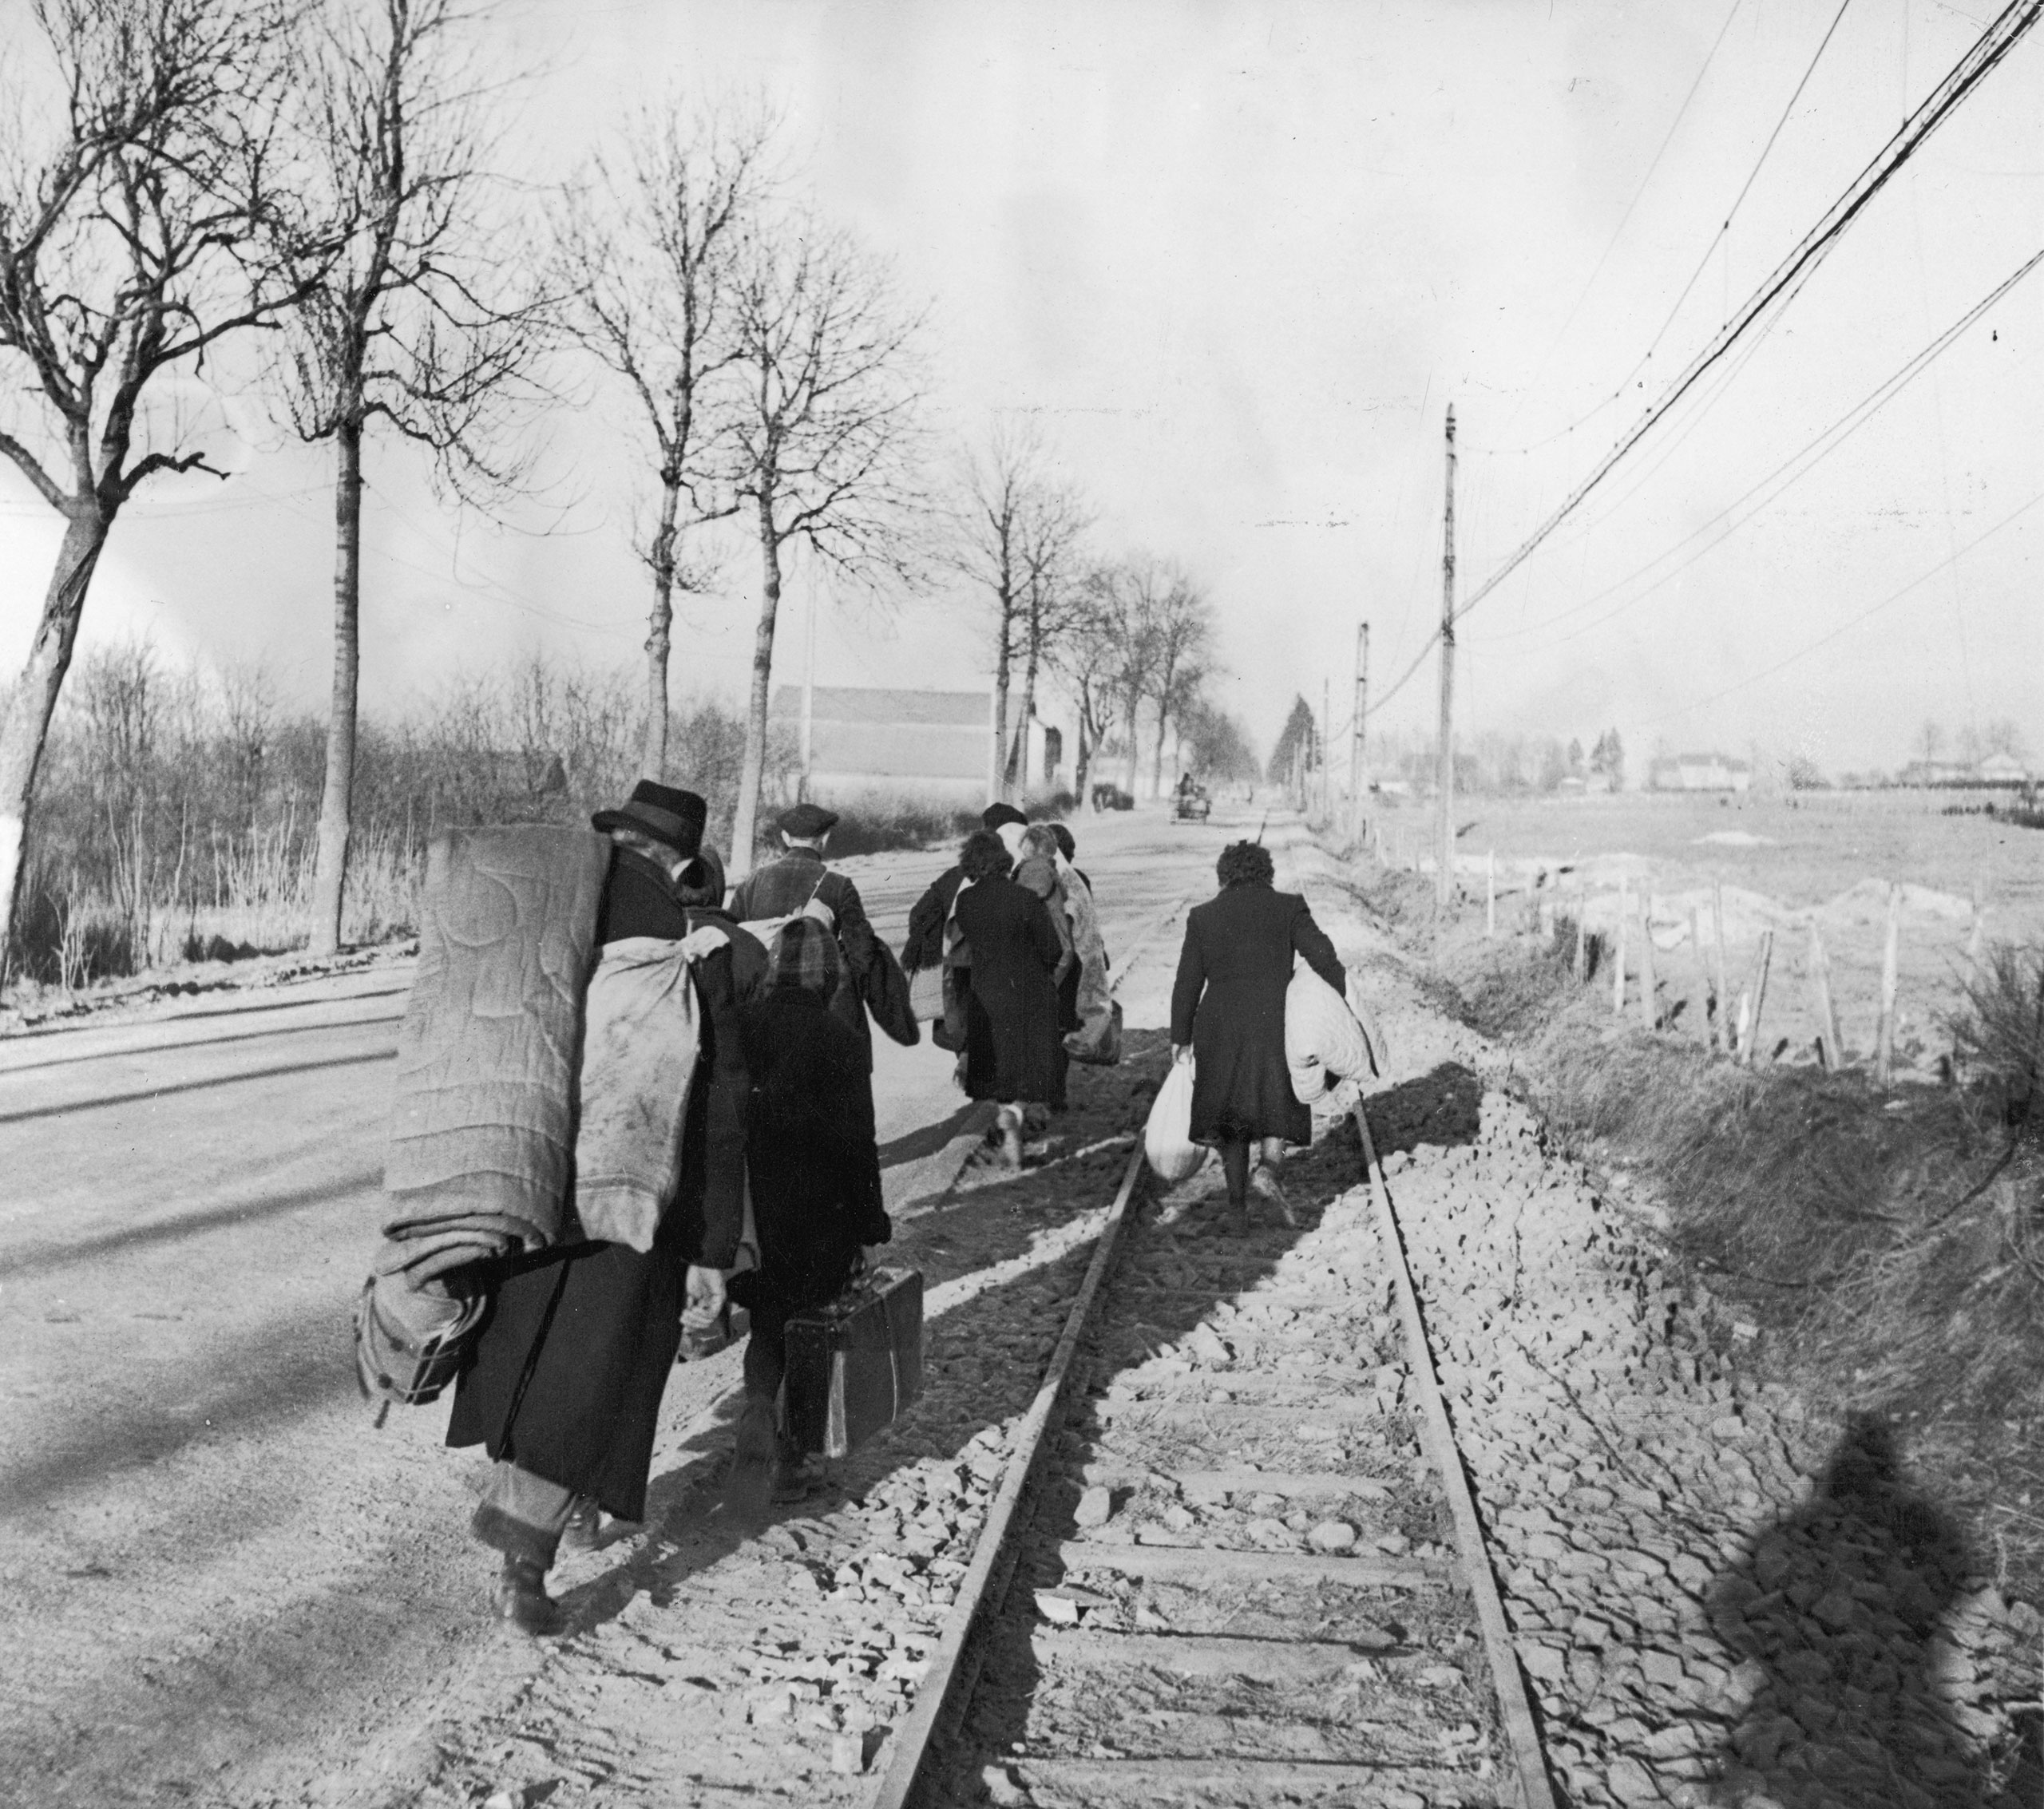 Belgian refugees carry their belongings with them as they flee from the advancing German army in January 1945.